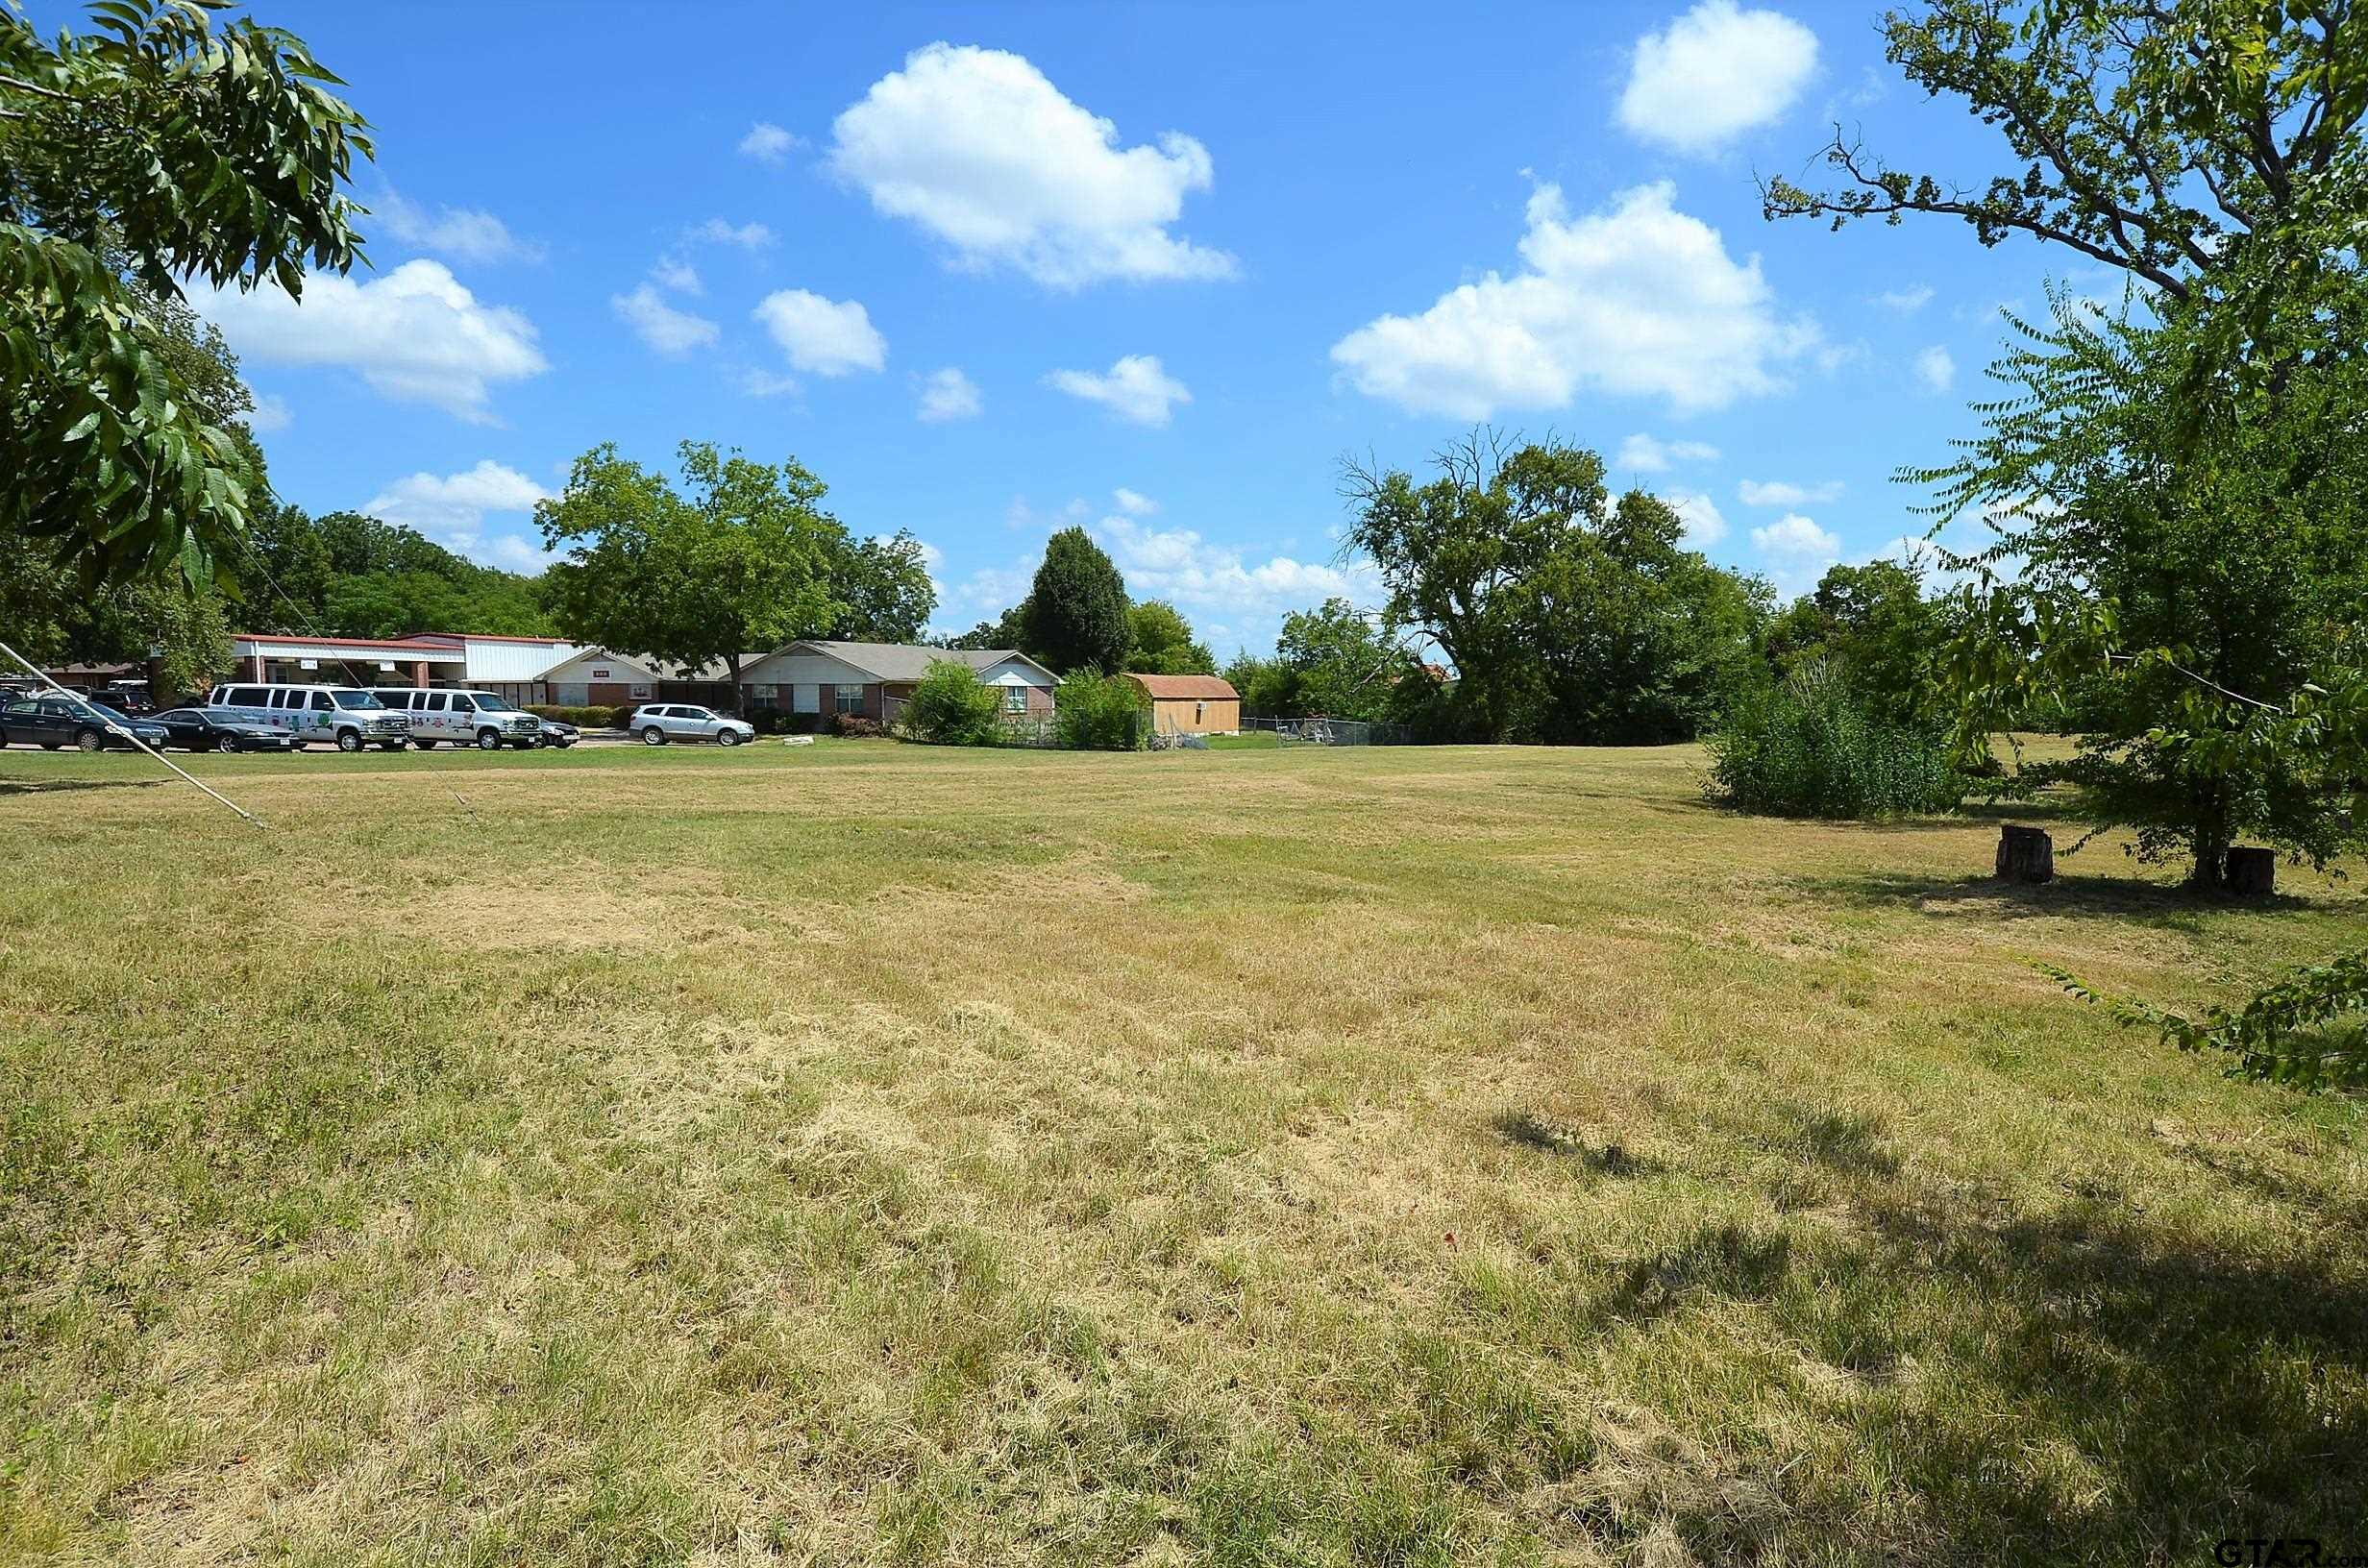 To the East, adjacent to this property is a well established preschool, Pecan Ridge School.